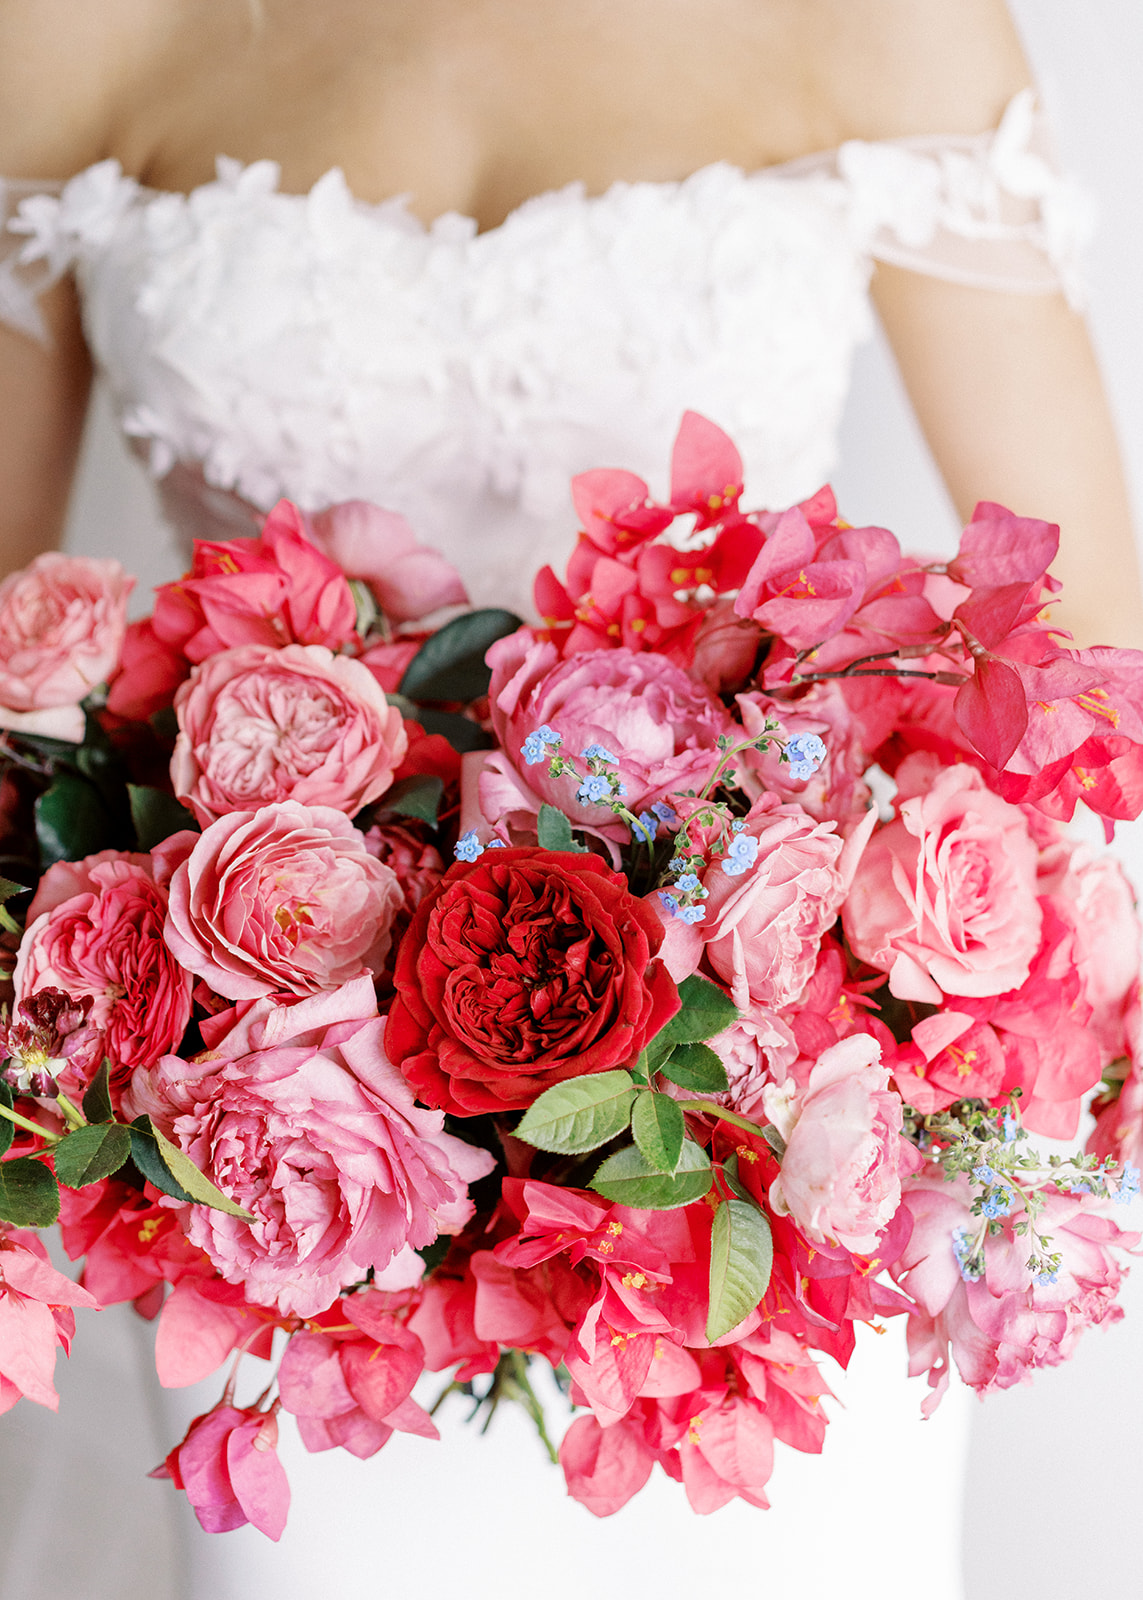 CLOSE UP OF BRIDE HOLDING PINK BRIDAL BOUQUET